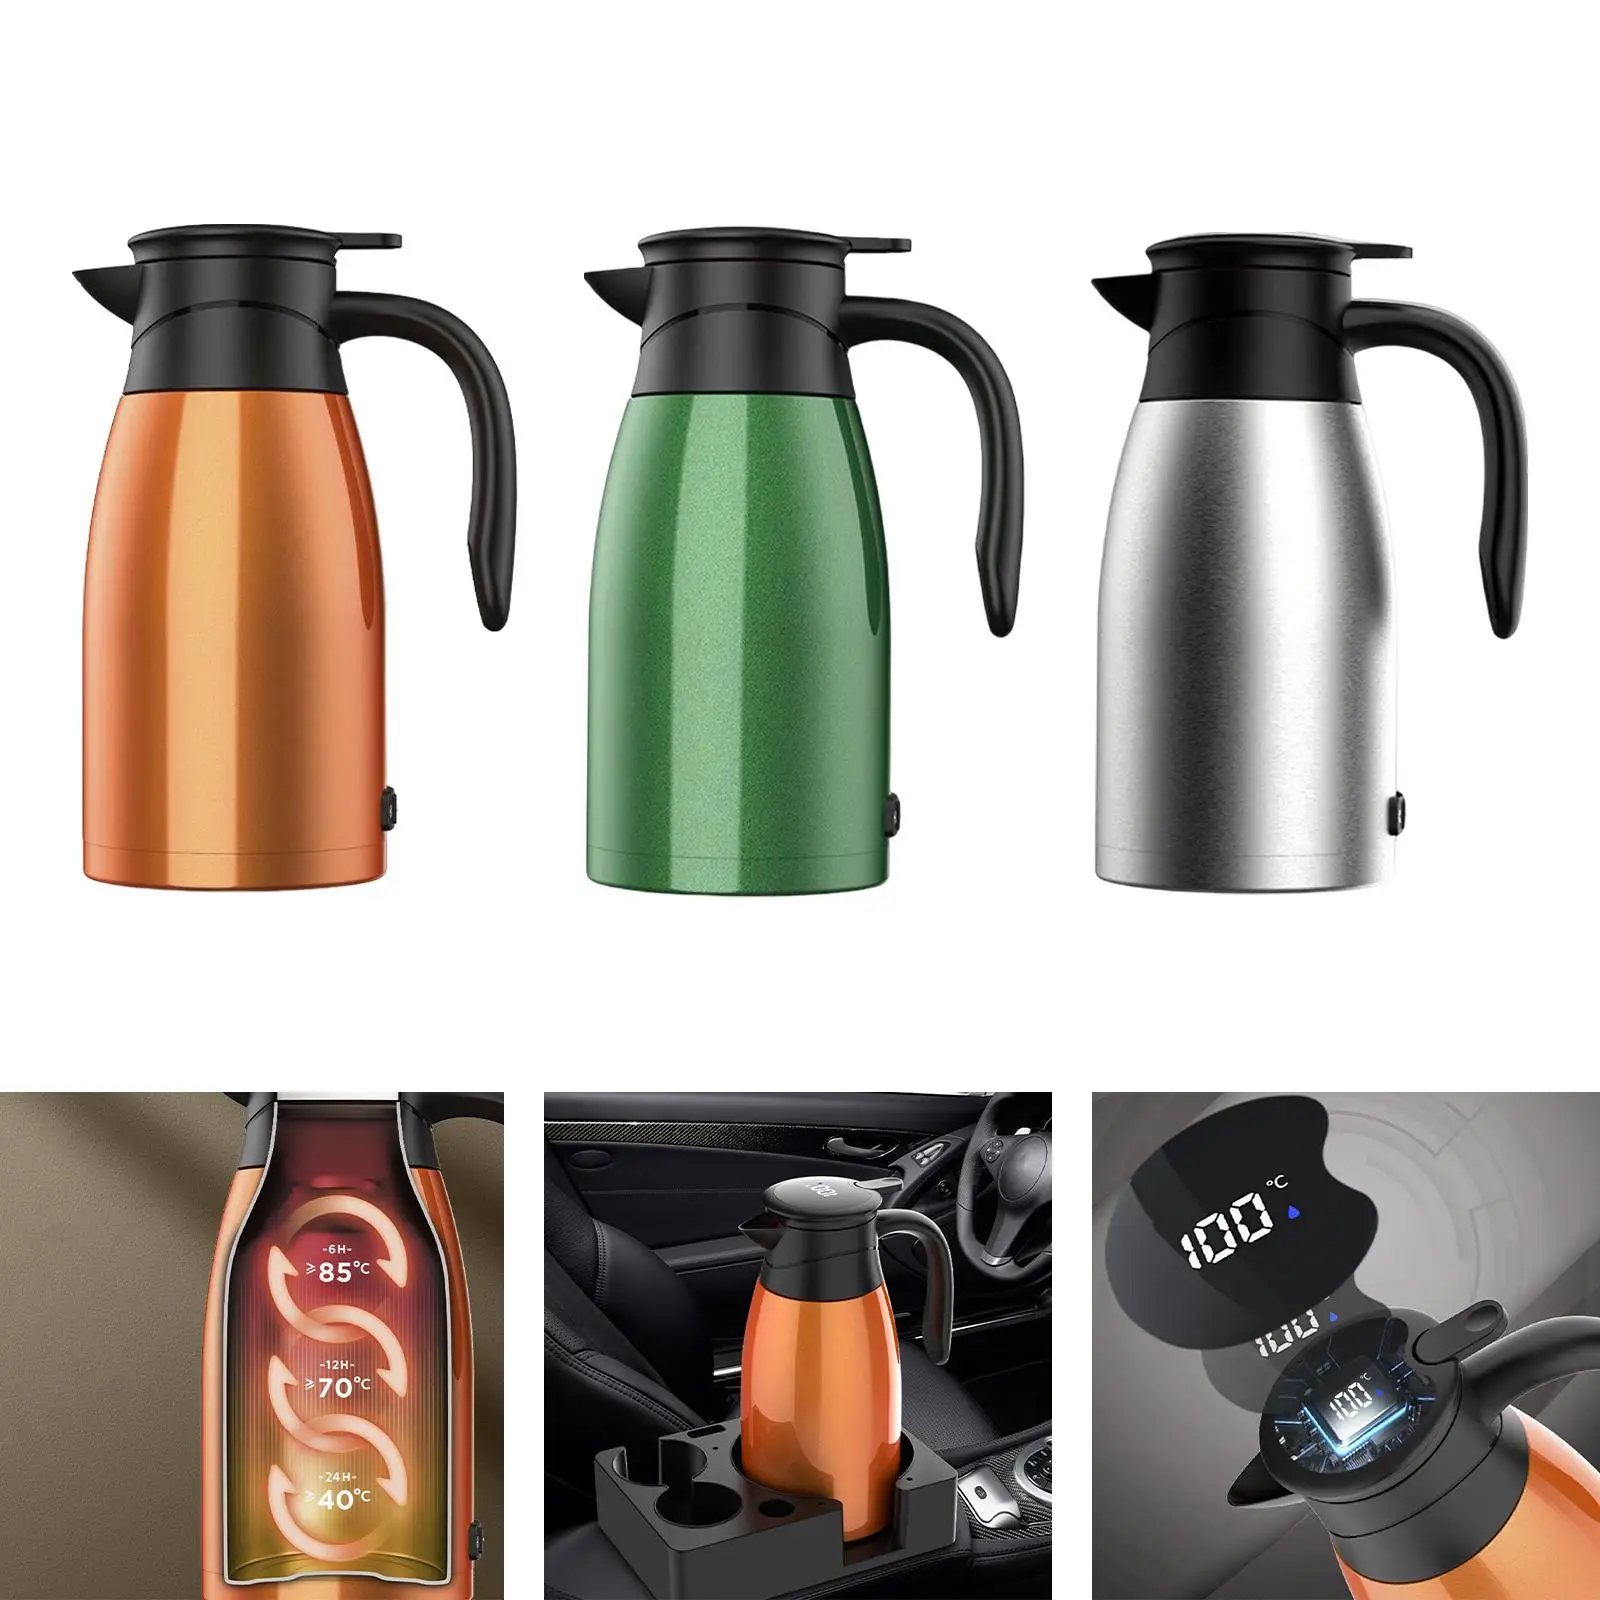 12V Portable Car Electric Kettle / Temperature Display Warmer Smart Stainless